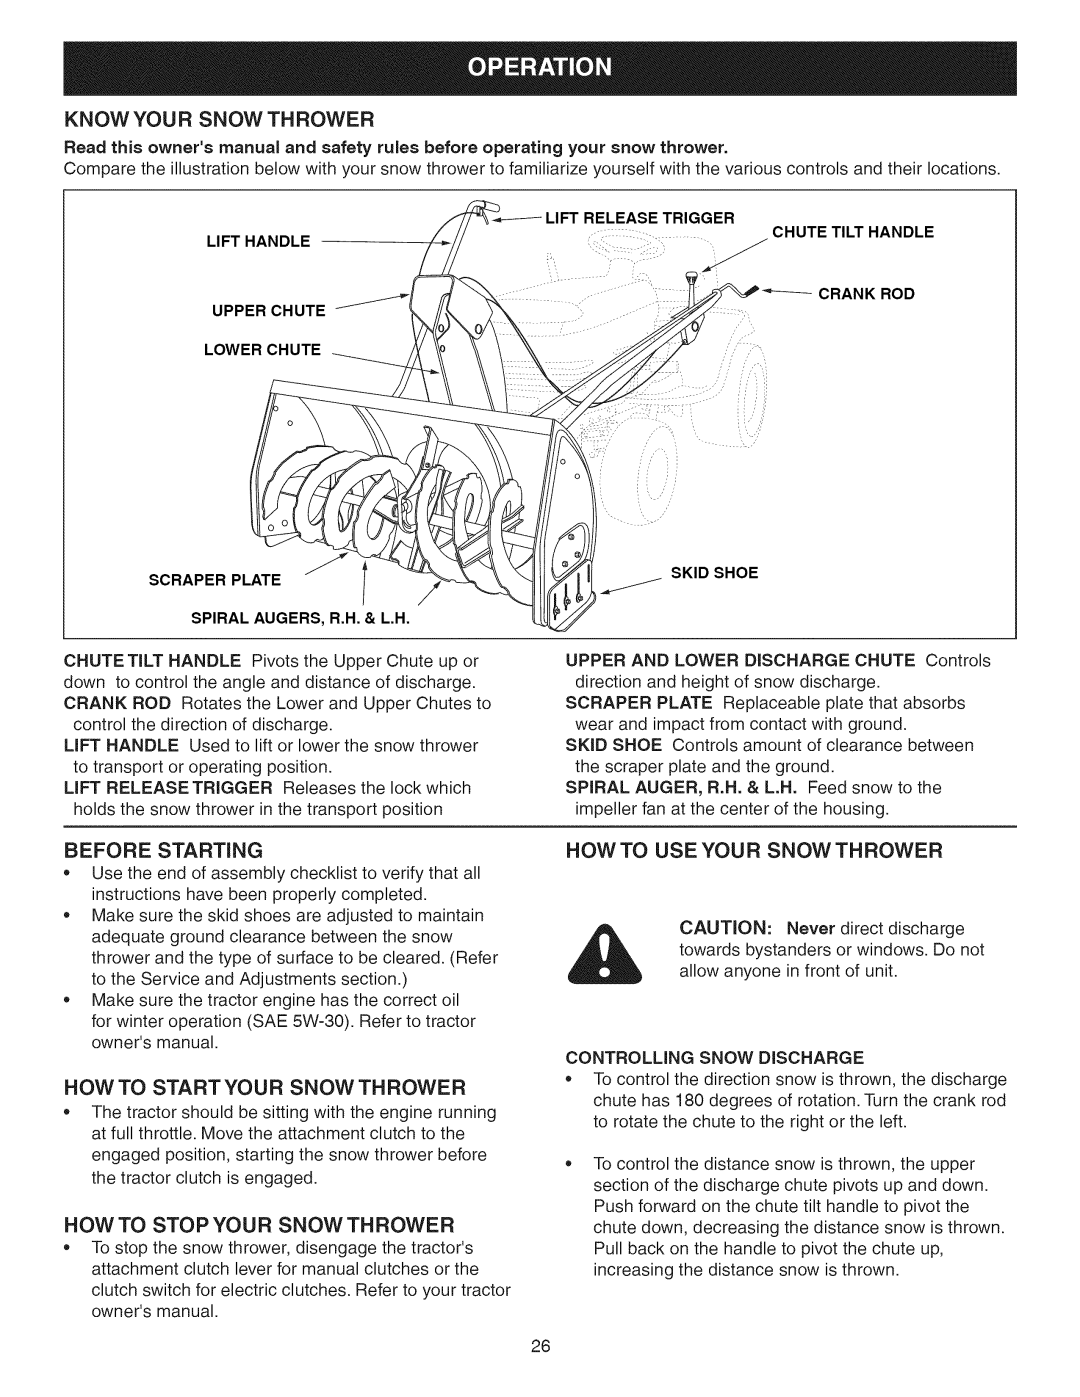 Craftsman 486.24837 manual Before Starting, How To Startyour Snow Thrower, Lift Release Trigger, Lift Handle, Scraper Plate 